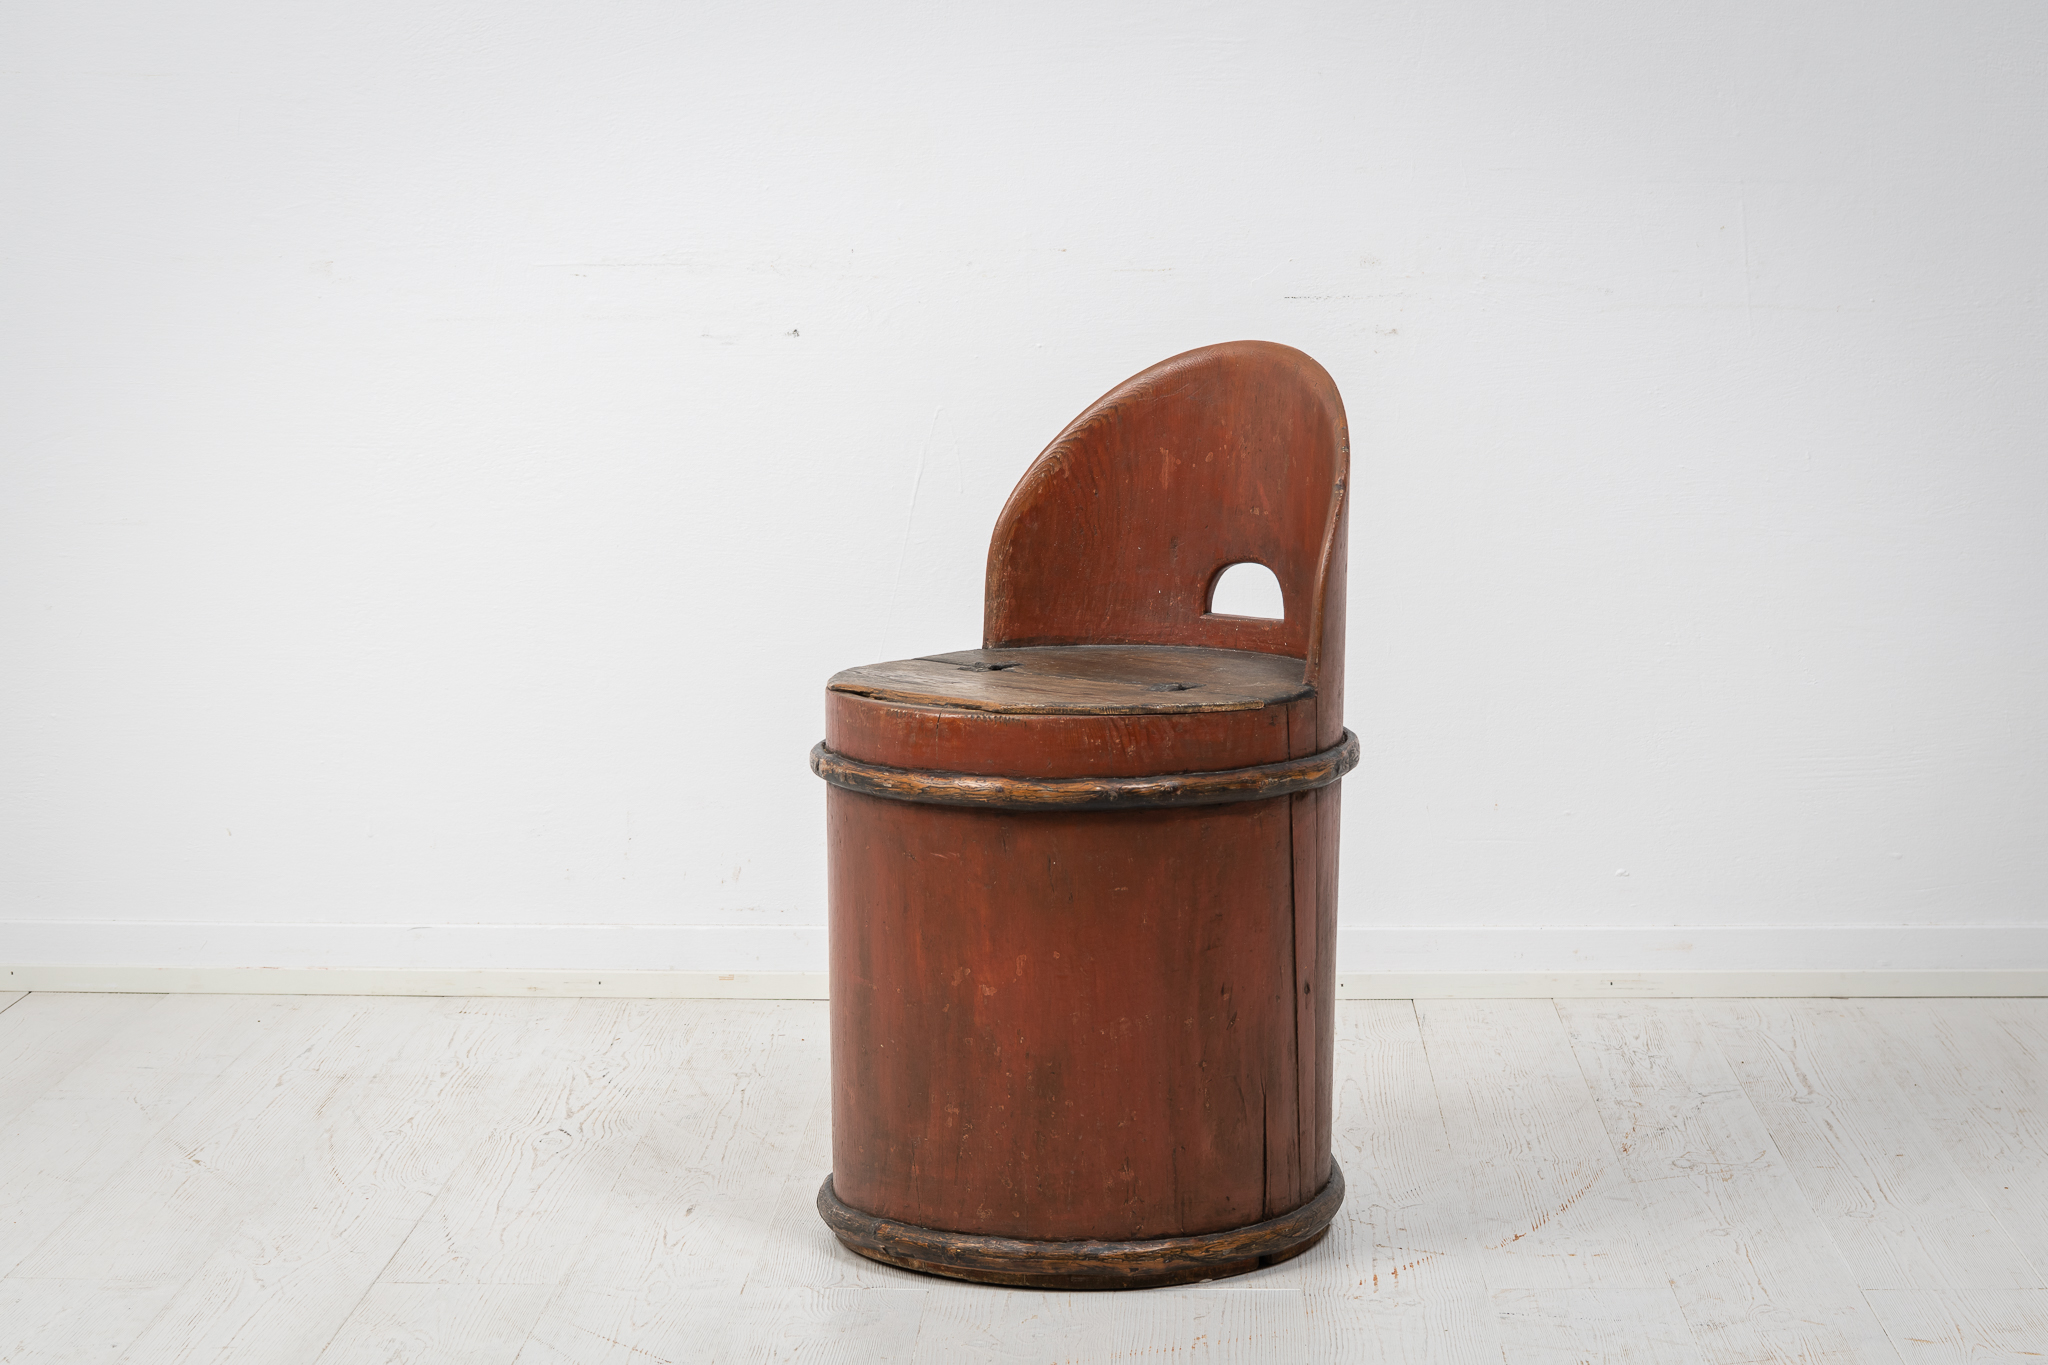 Antique Swedish stump chair in folk art. The chair has a round shape and is made from a hollowed pine tree stump. The chair is in untouched condition